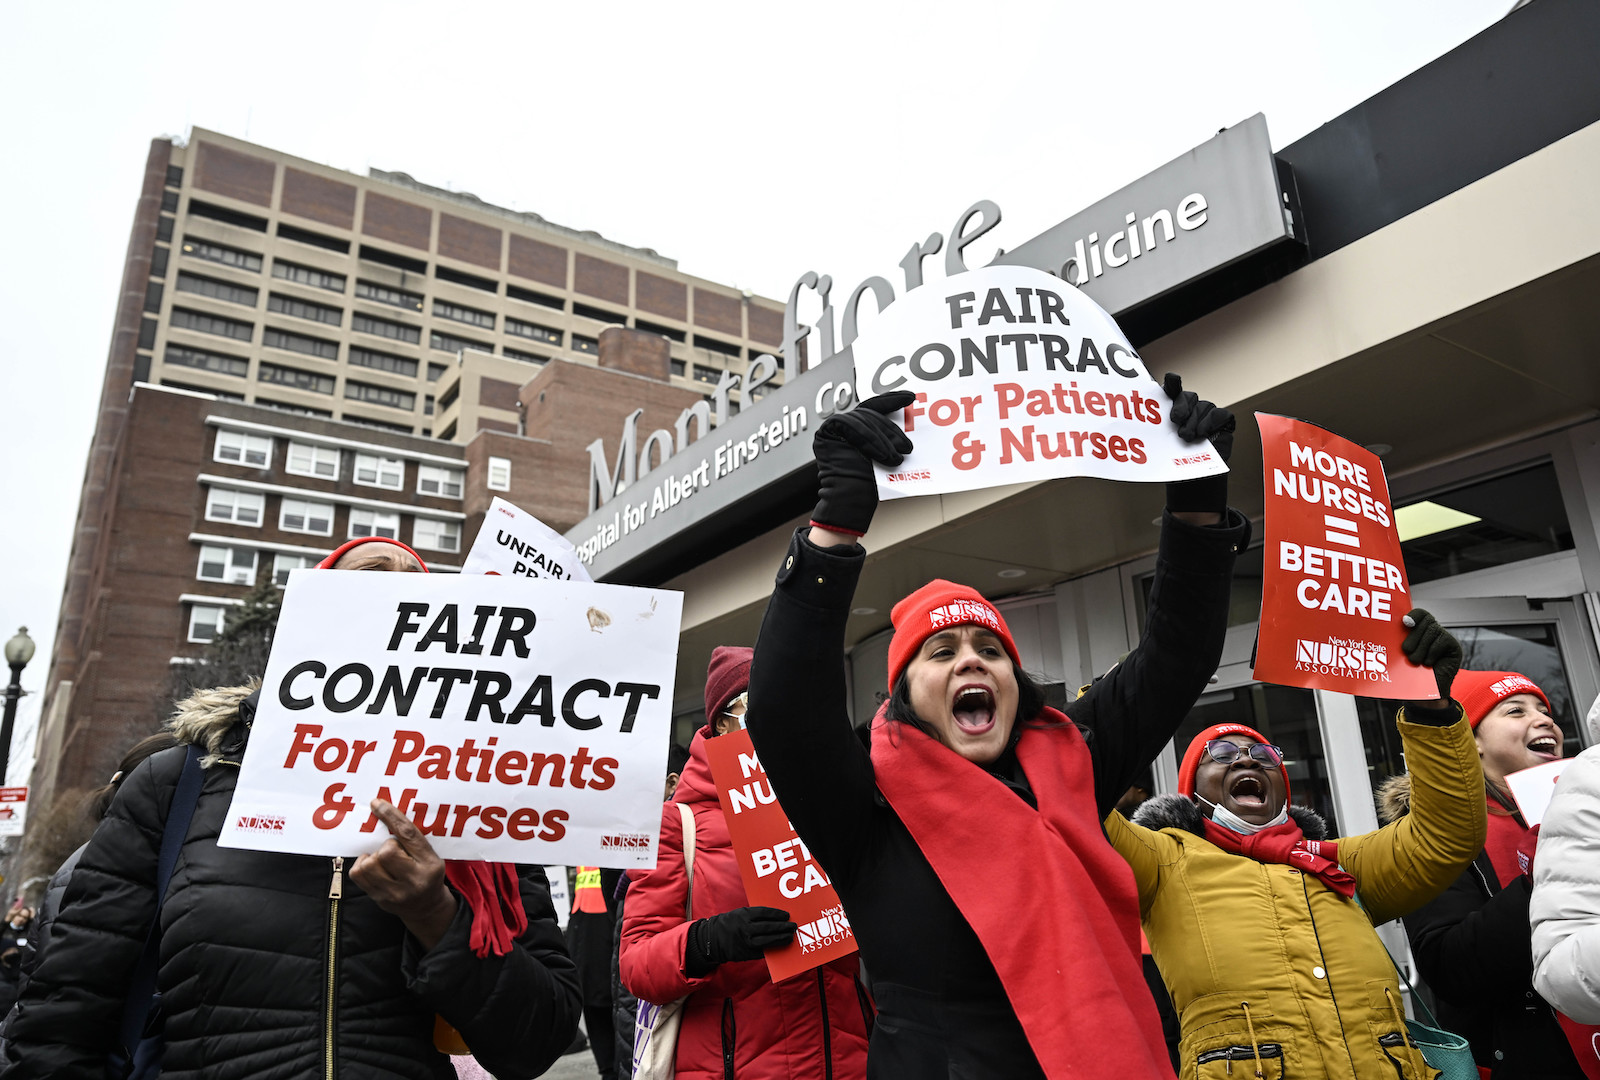 People on a picket line holding up signs that read FAIR CONTRACT For Patients & Nurses and MORE NURSES = BETTER CARE